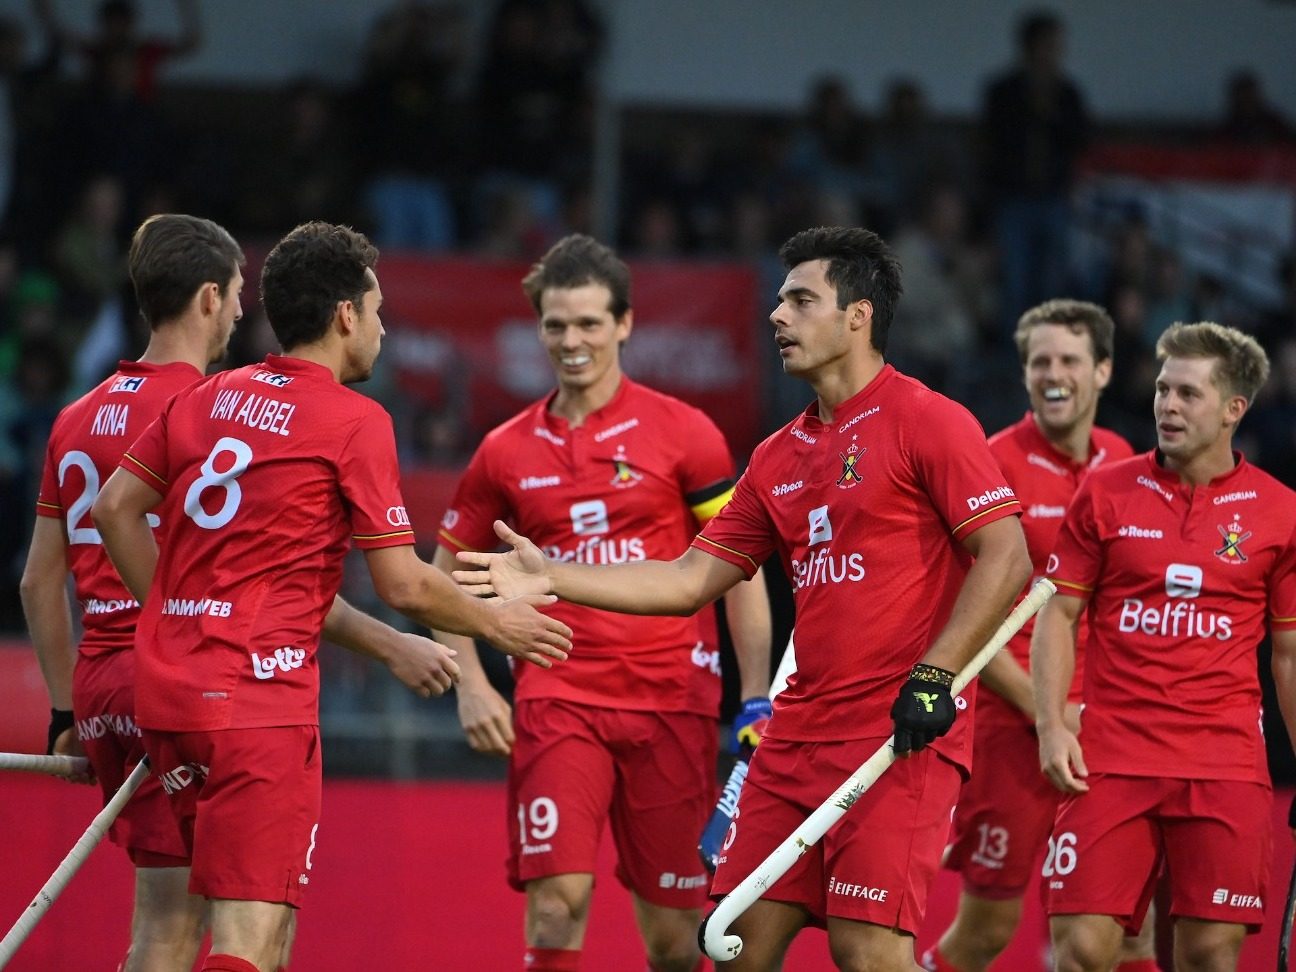 FIH Hockey Pro League: Netherlands defeat Argentina 5-2 in the first leg